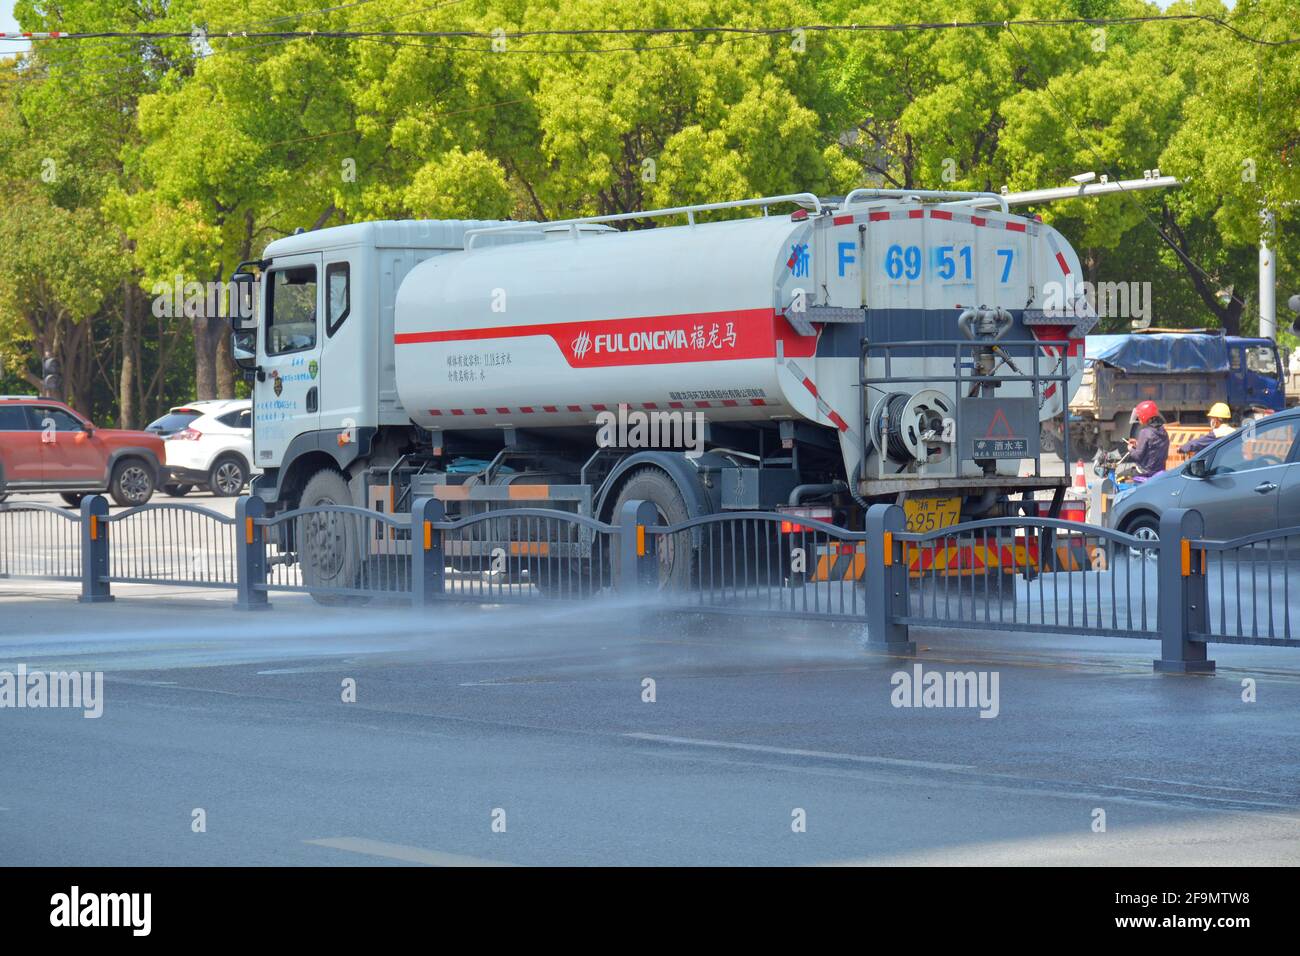 Water truck spraying a road in China, they are out daily to help keep dust levels down with the constant construction work going on. Stock Photo